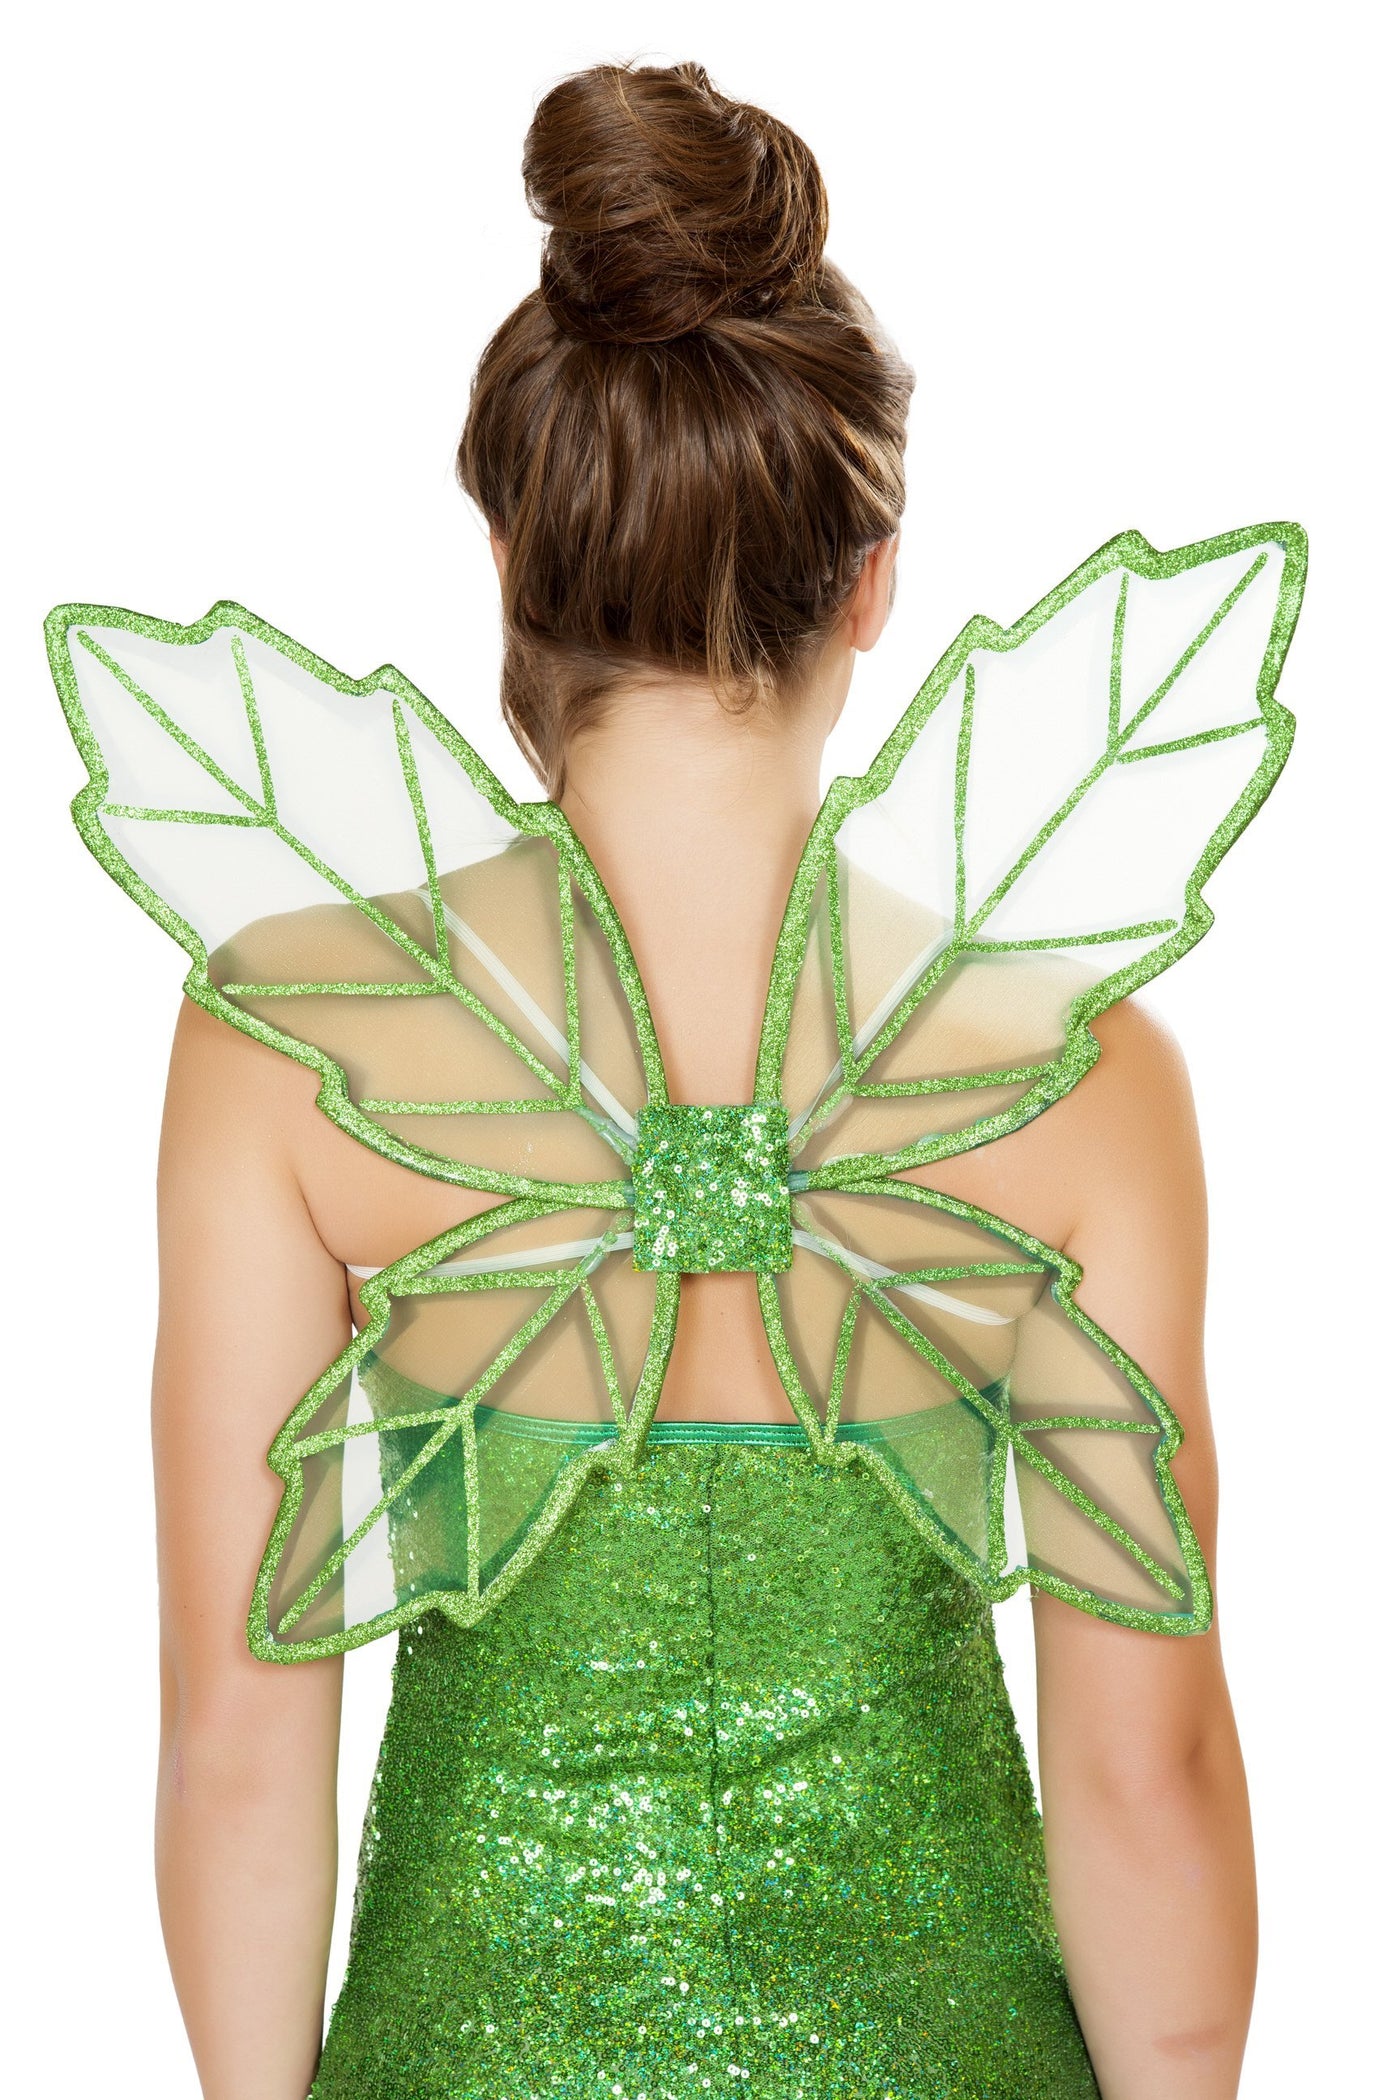 Buy Green Fairy Wings from RomaRetailShop for 14.99 with Same Day Shipping Designed by Roma Costume, Inc. 4728-AS-O/S